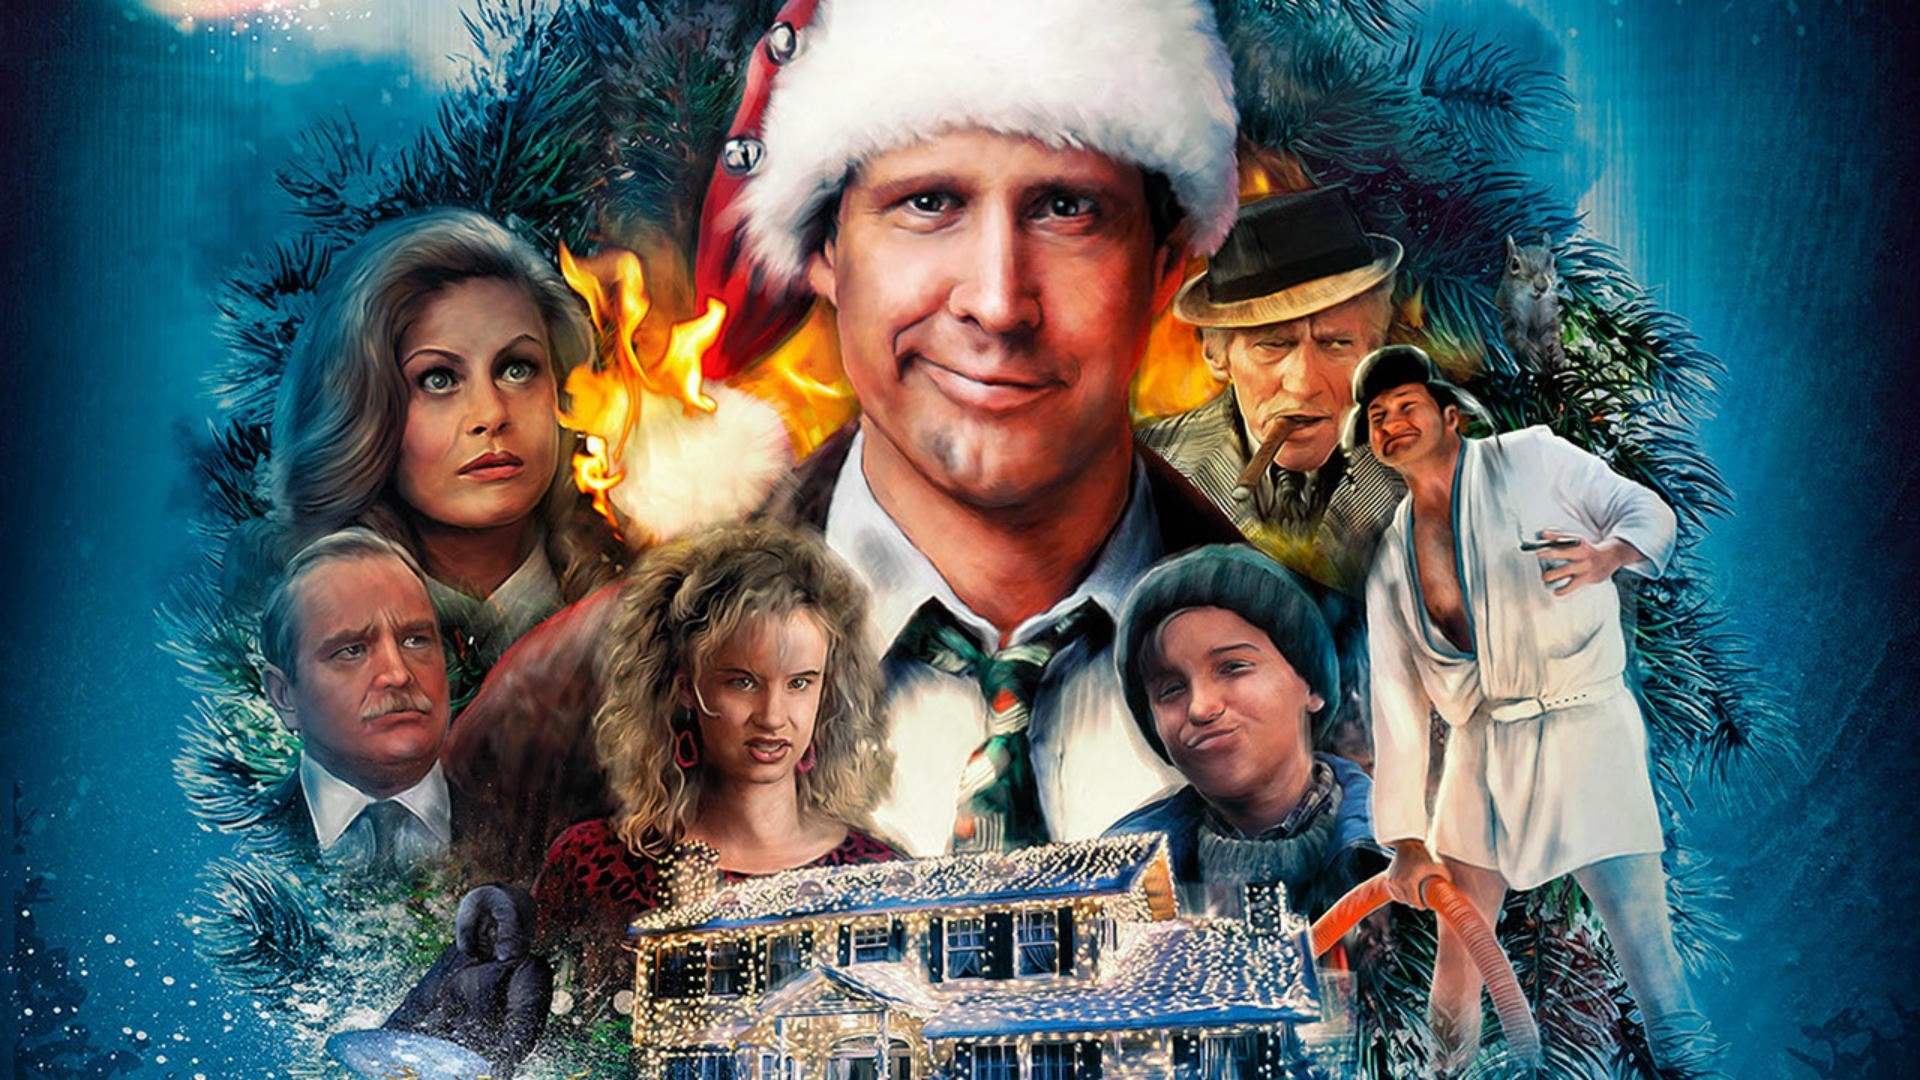 1920x1080 free high resolution wallpaper national lampoons christmas vacation, Dee  Walter 2017-03-20